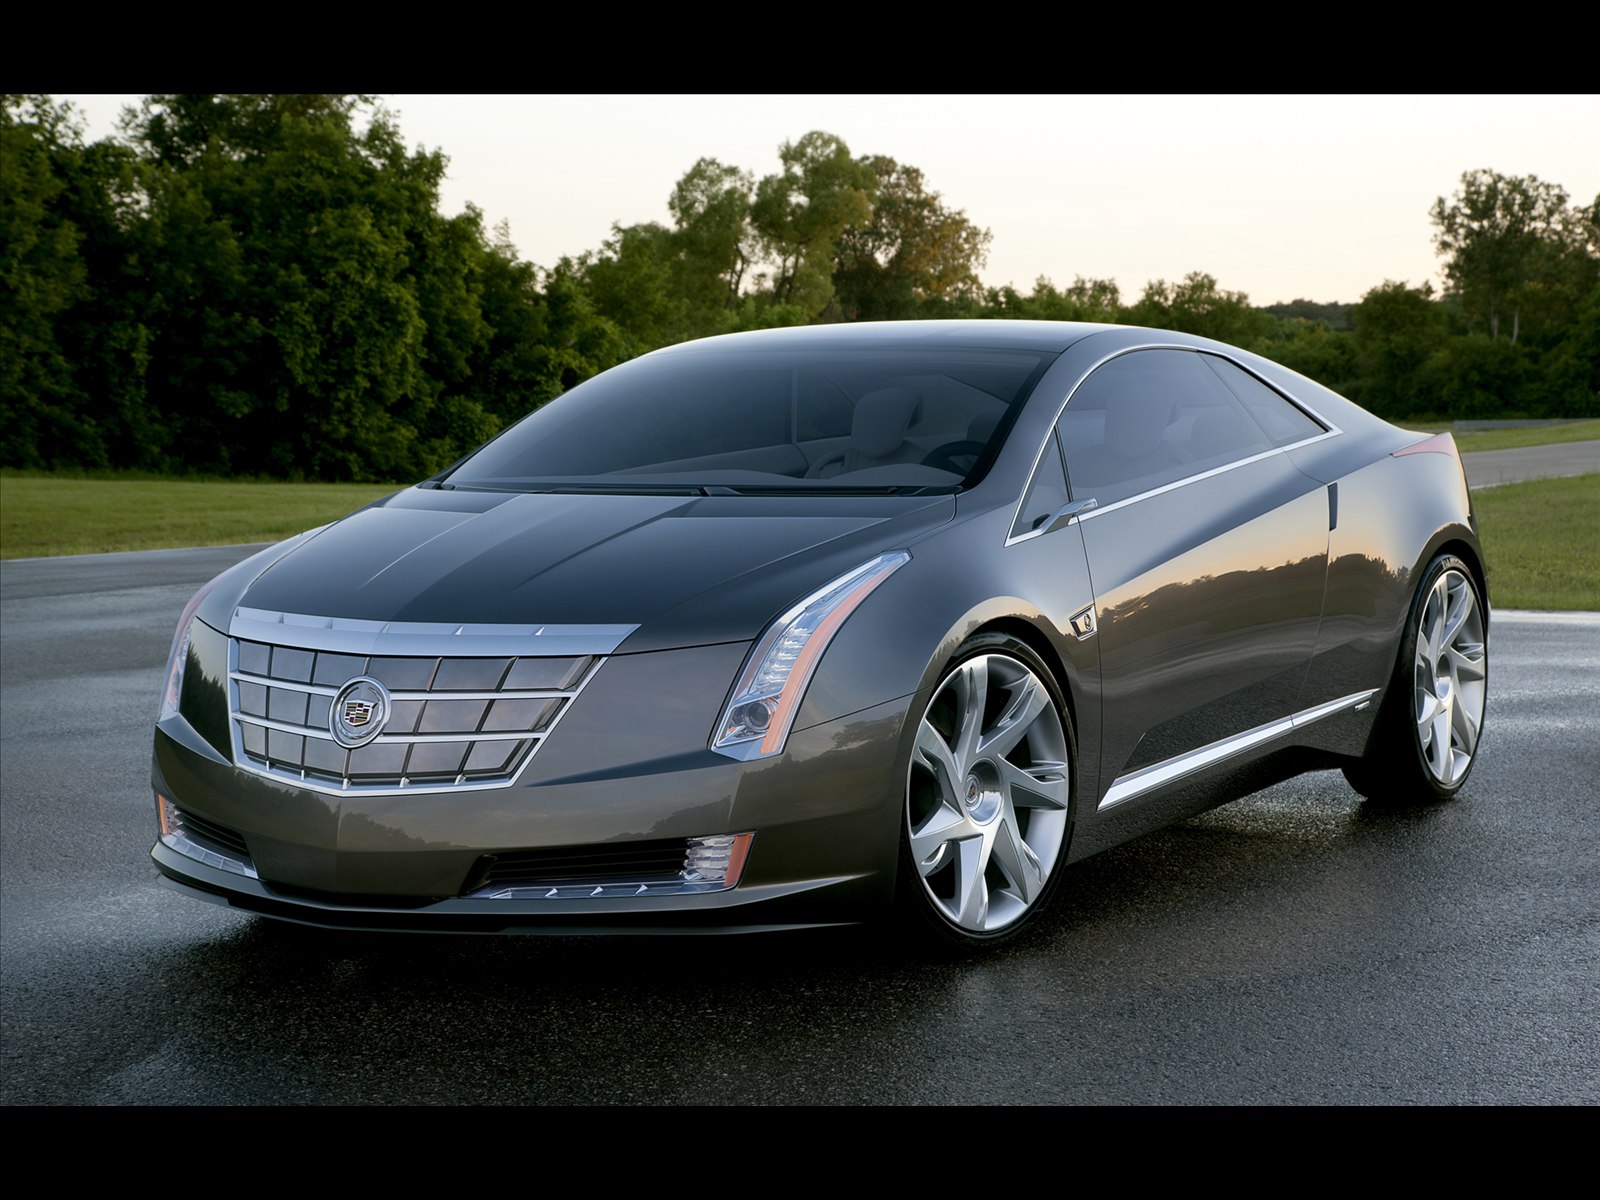 cadillac-elr-2012-electric-car-pictures-08.jpg (1600×1200)